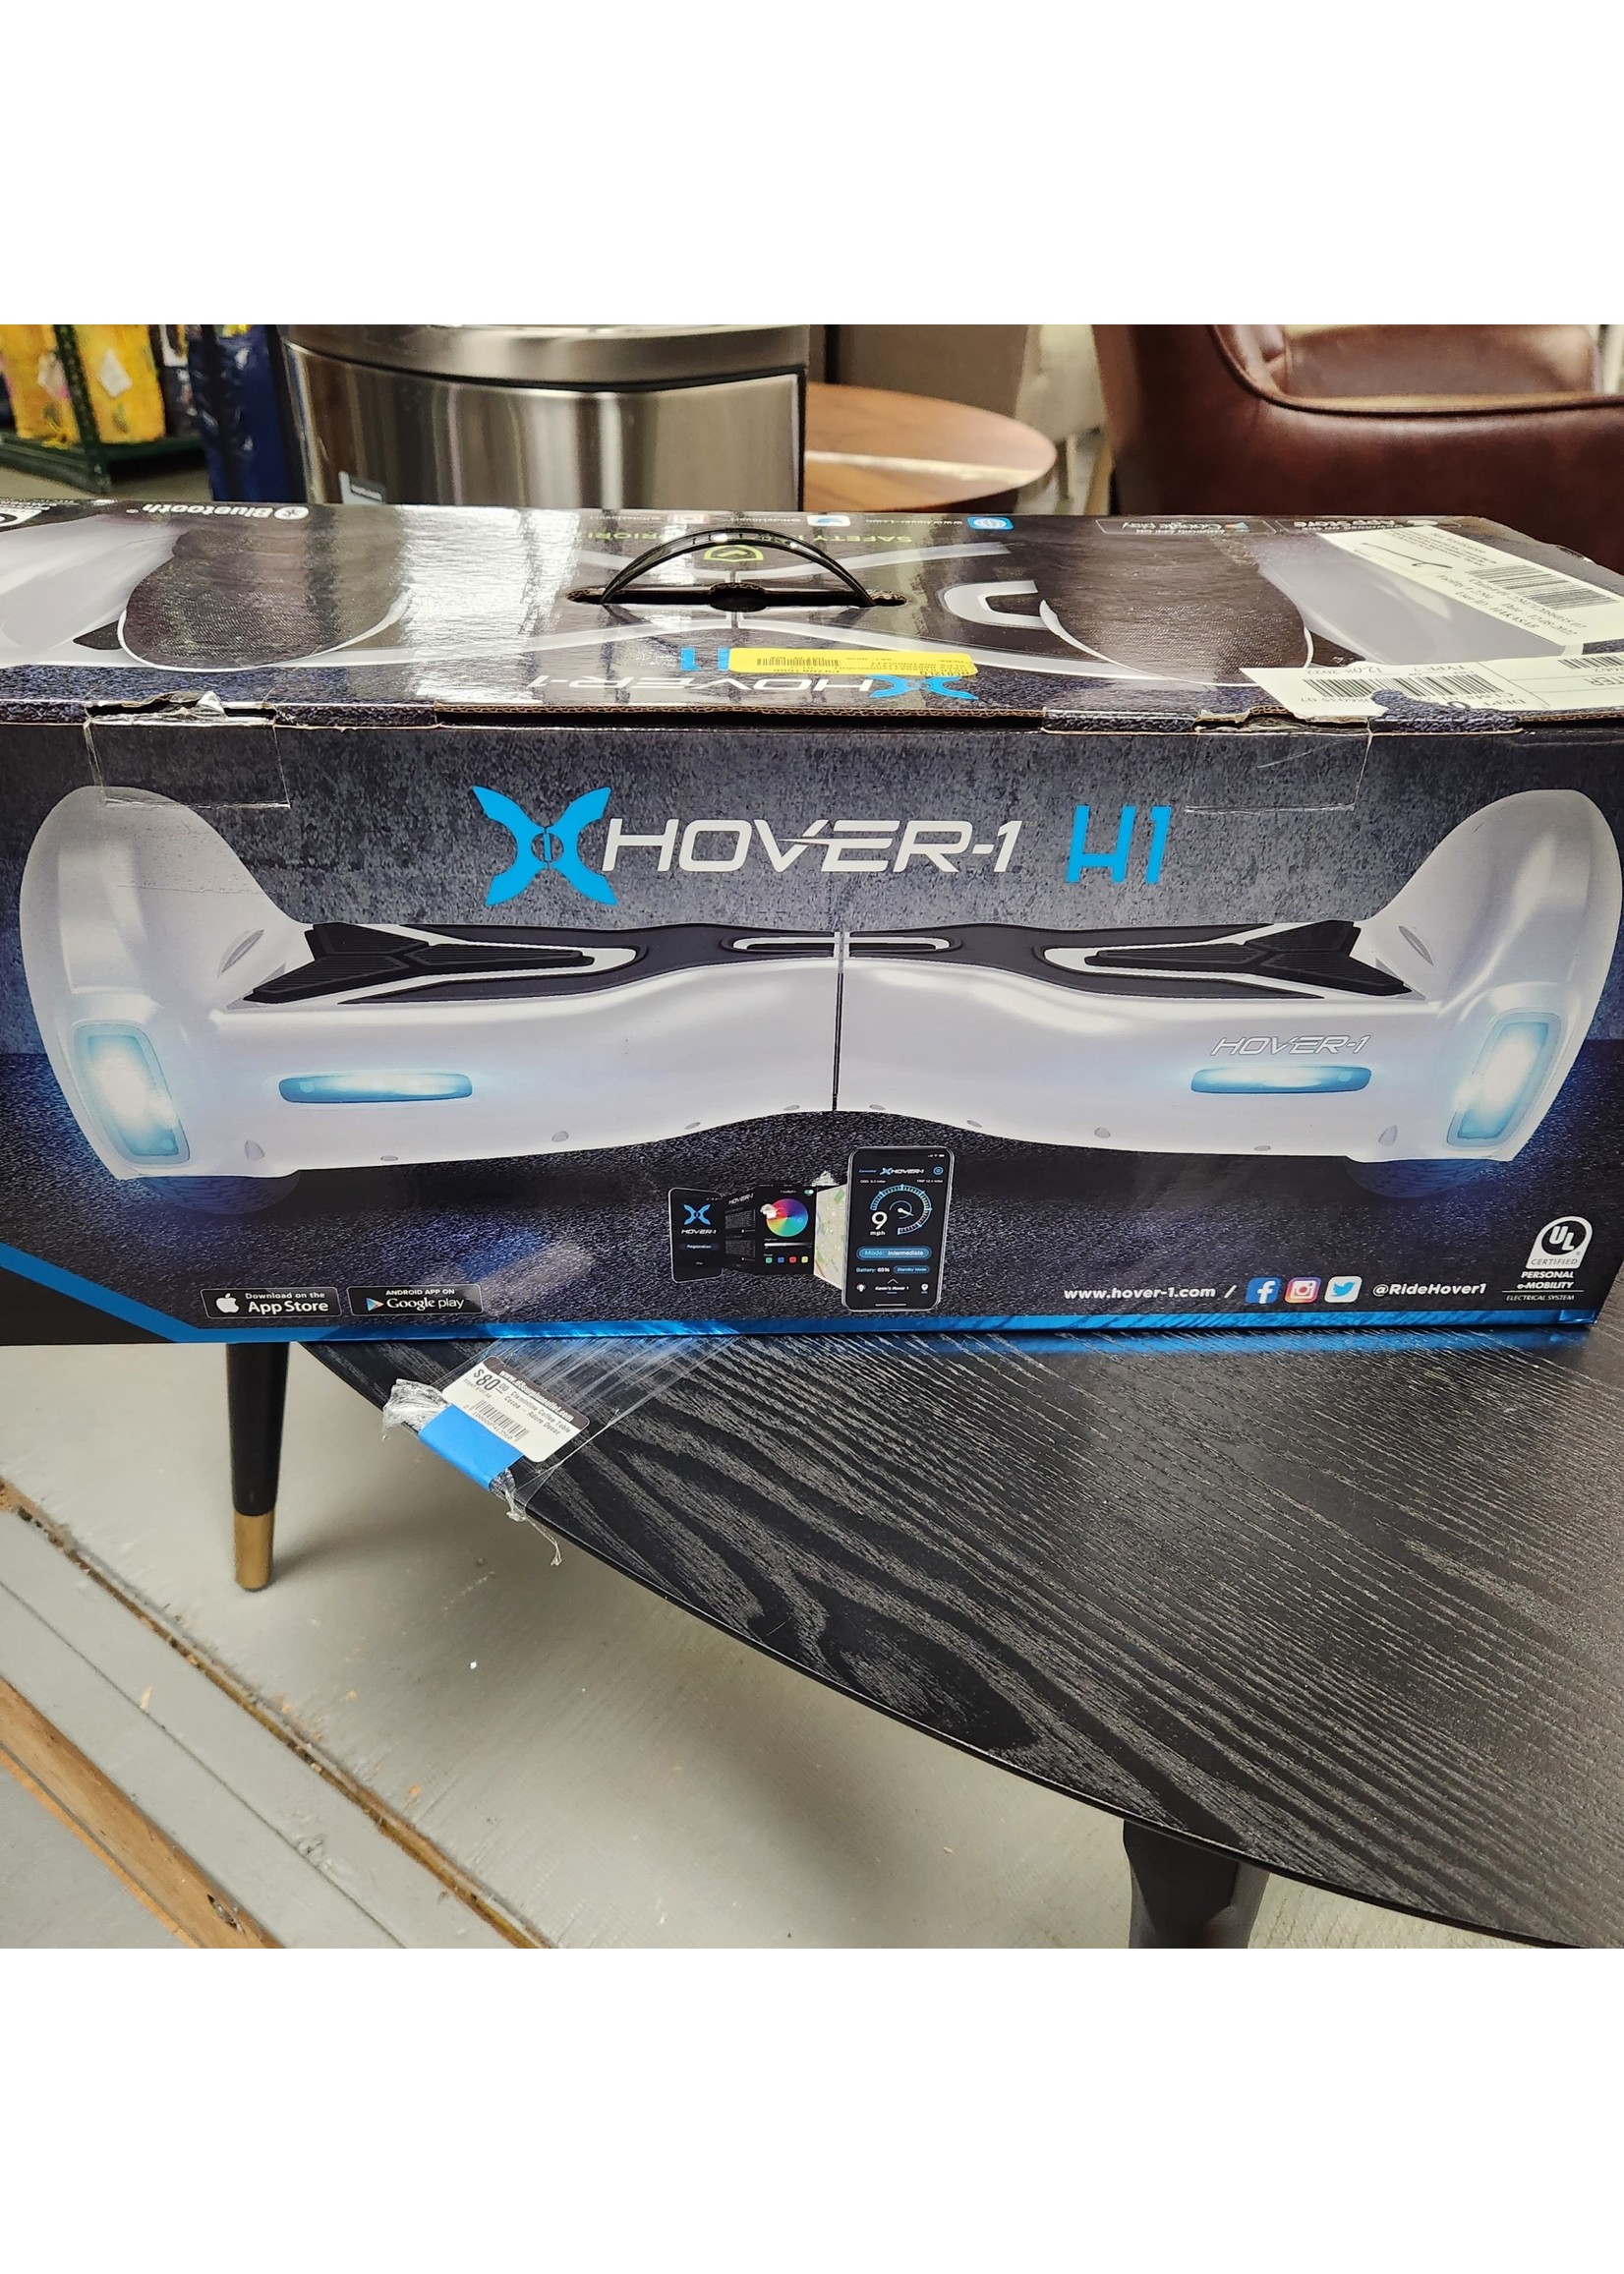 Hover-1 H1 Hoverboard, White, 264 lbs. Max Weight, LED Lights